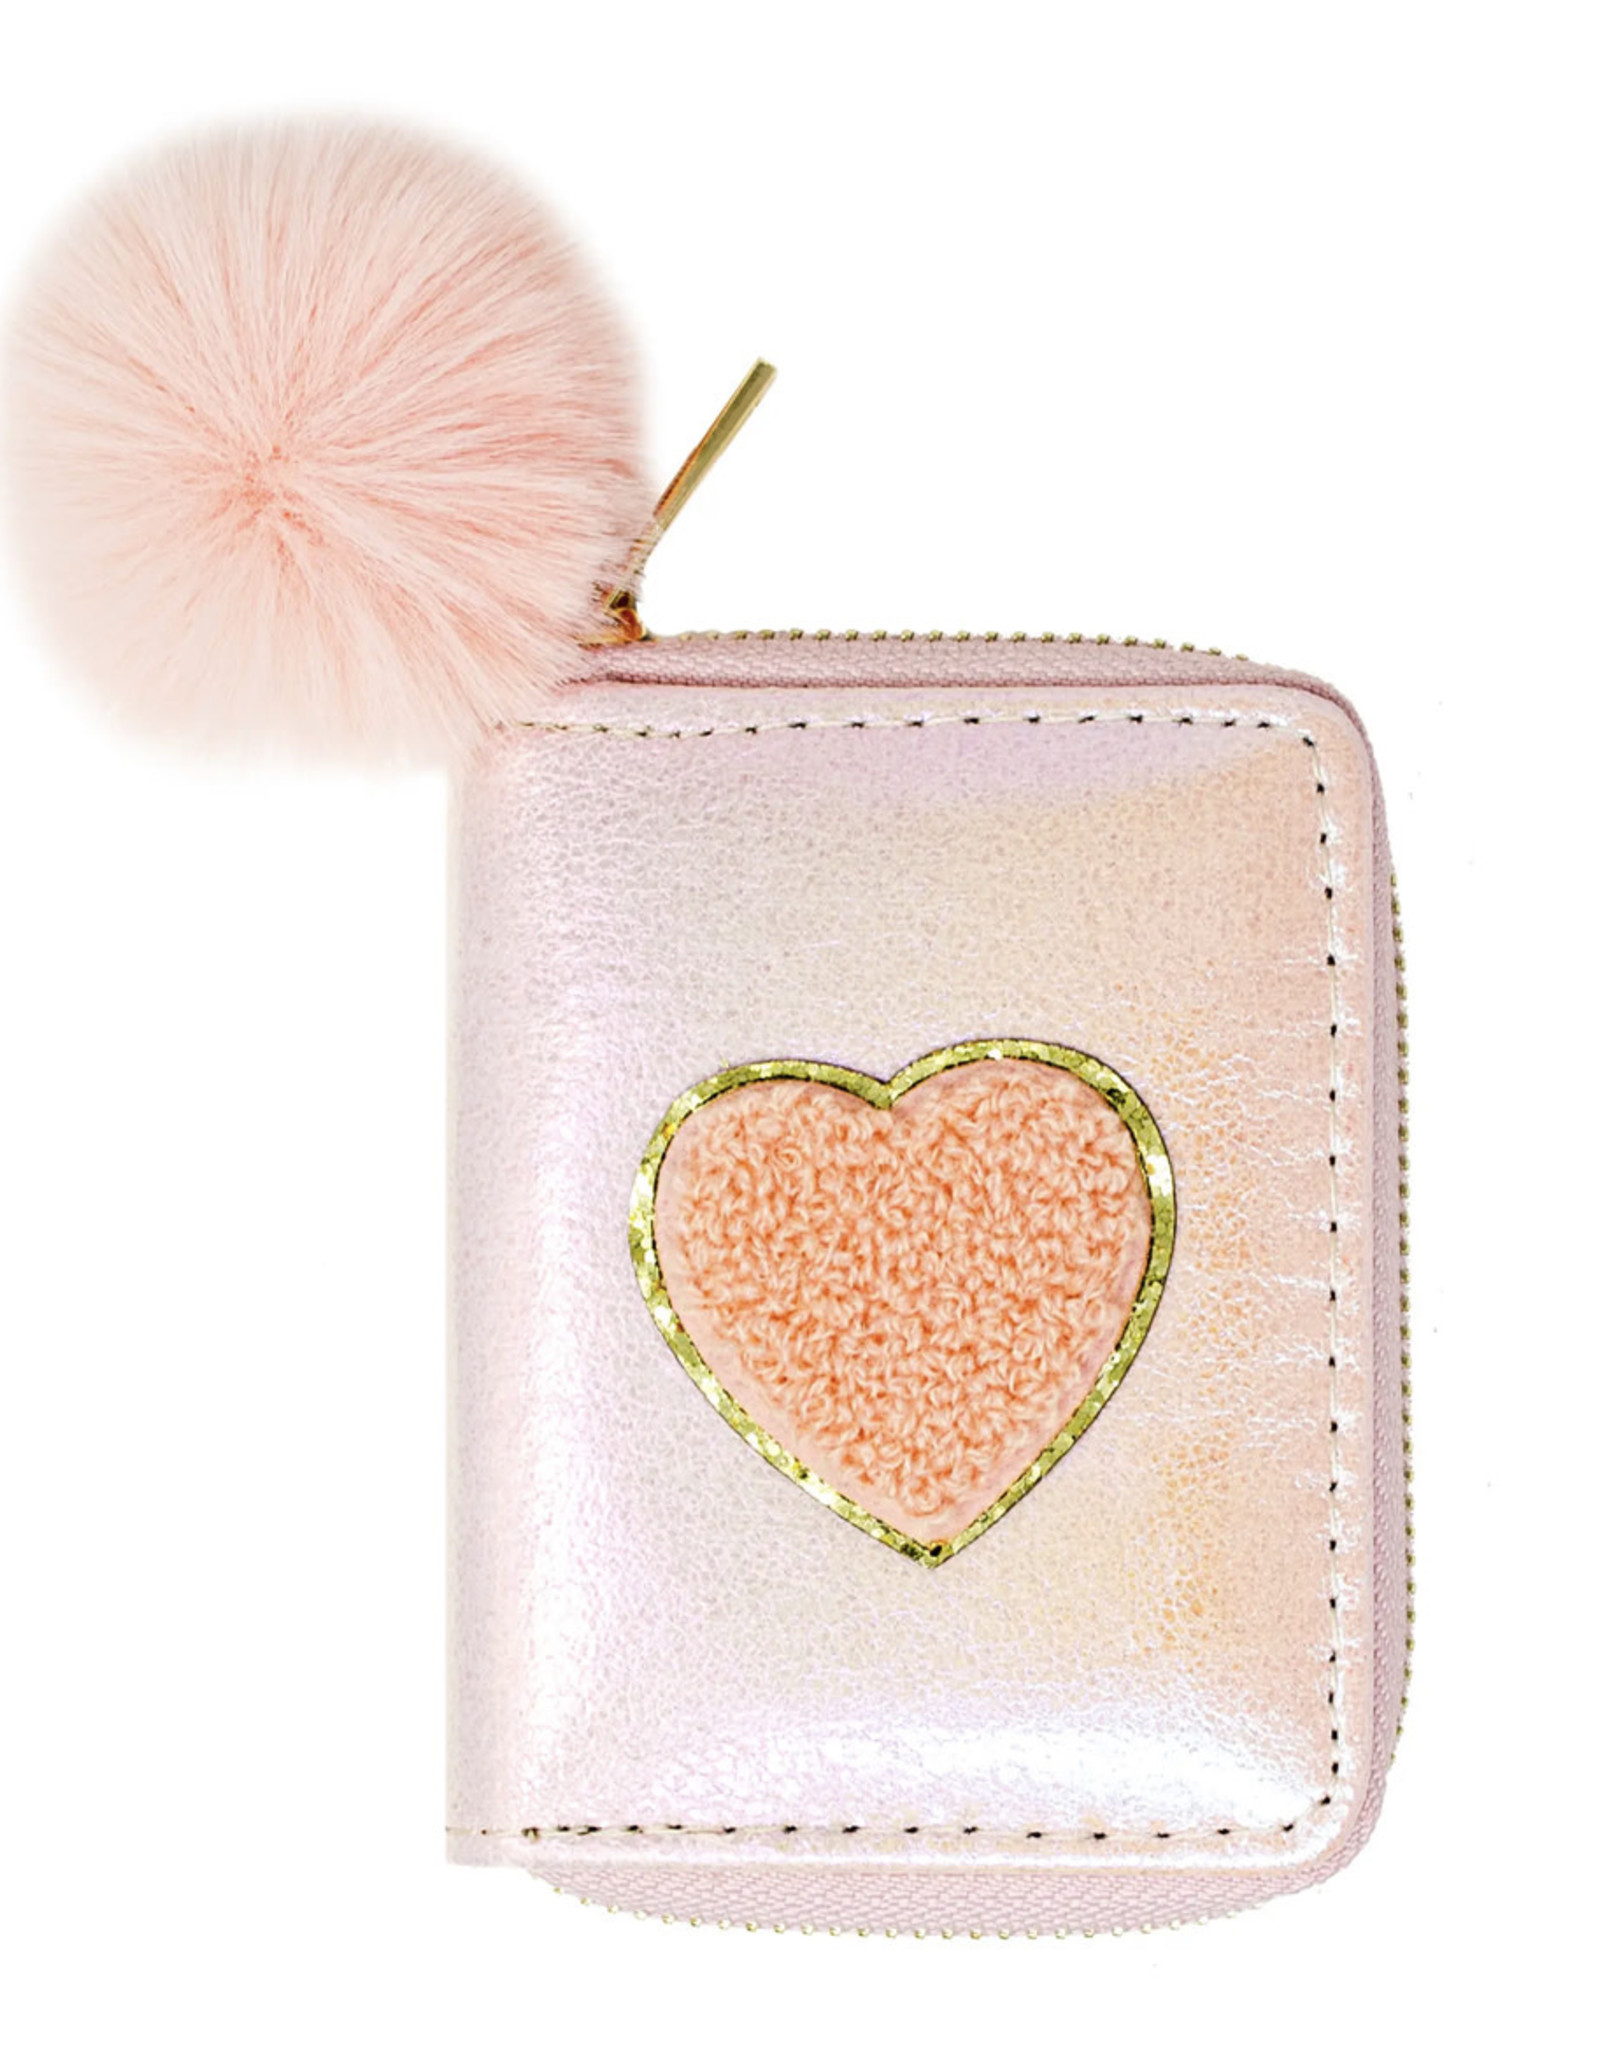 Zomi Gems Shiny Heart Wallet in Pink